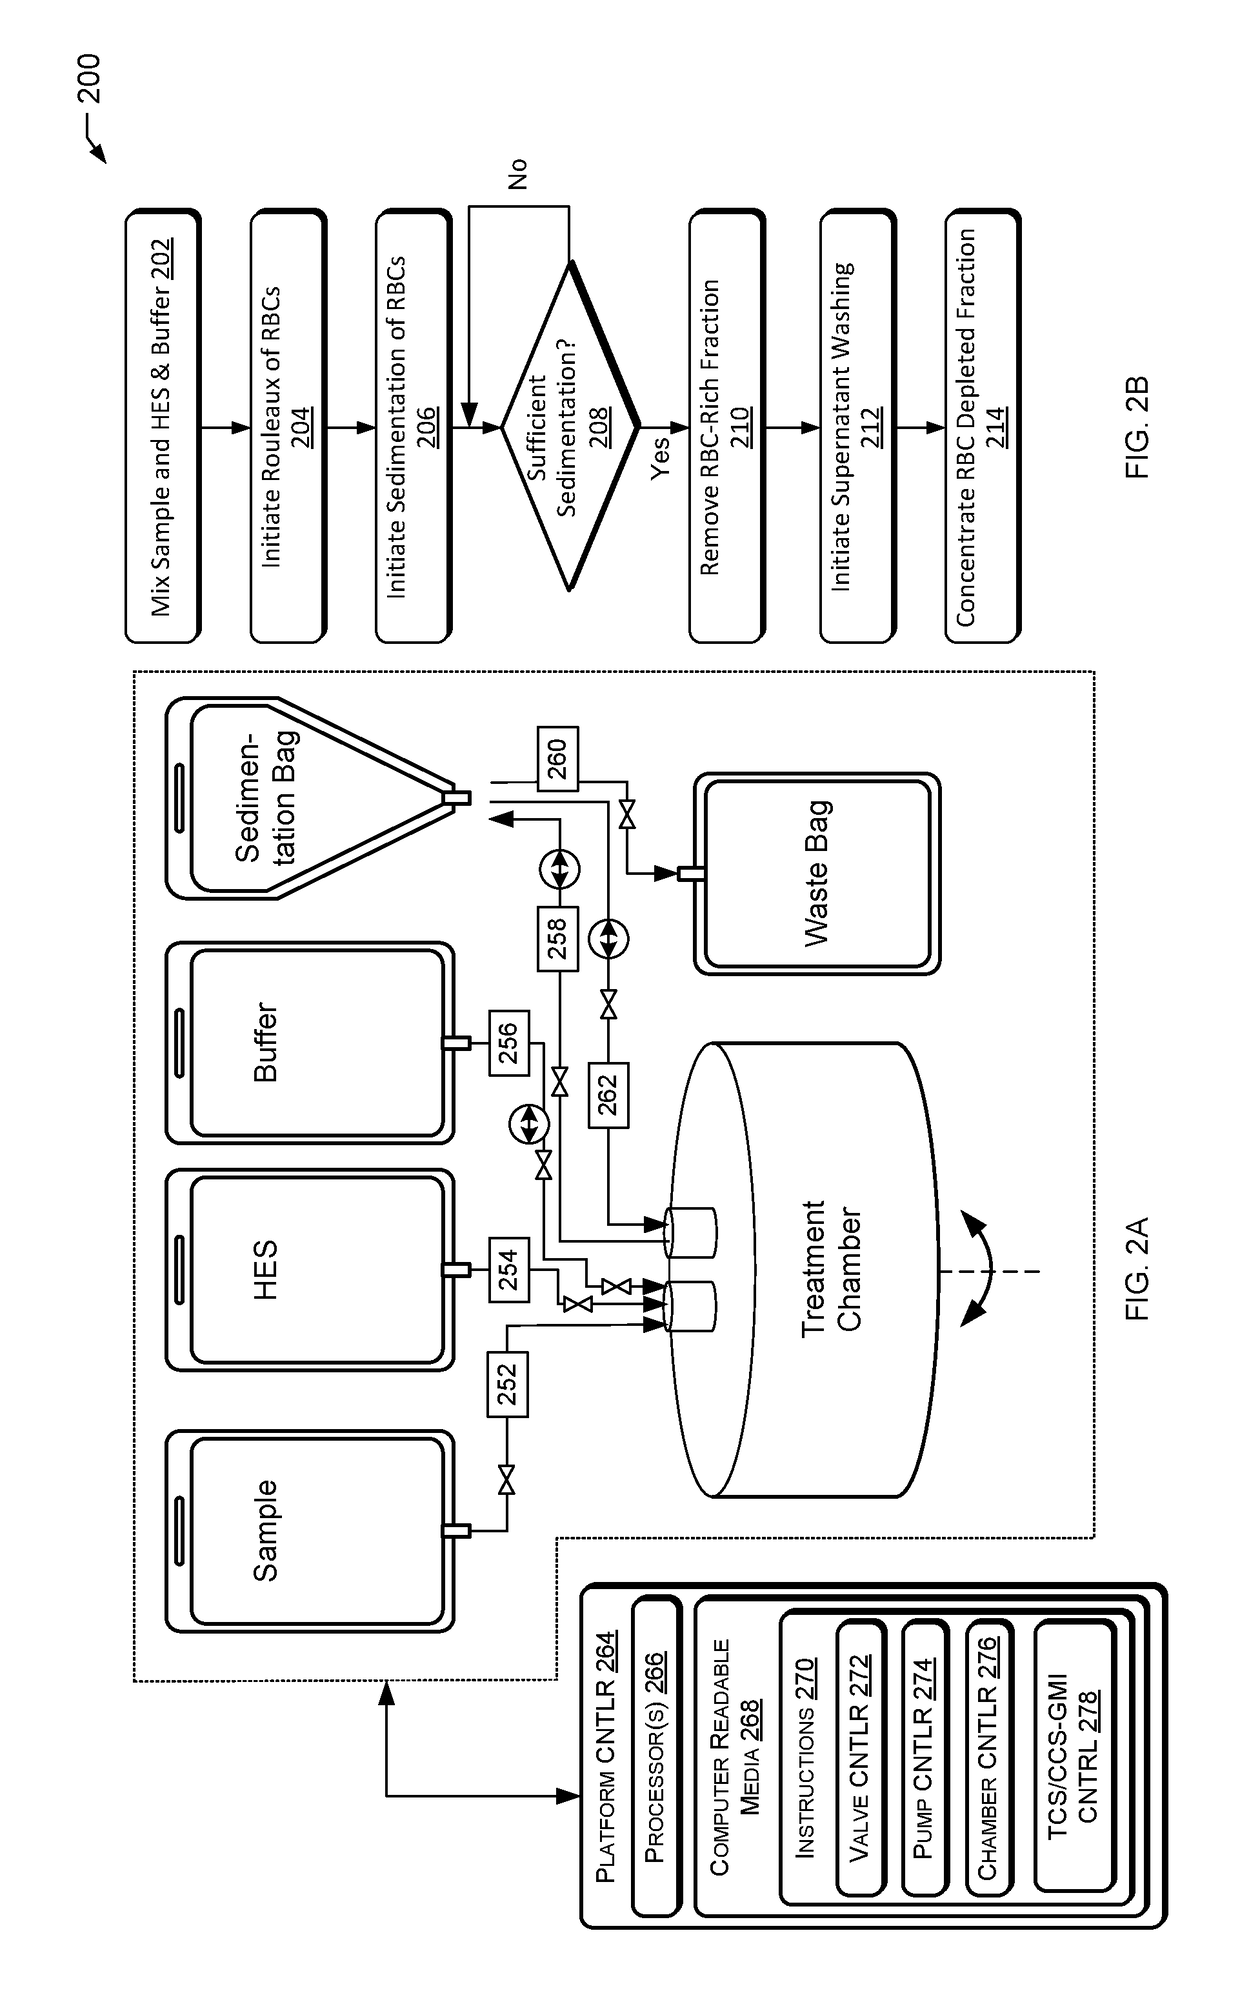 Point-of-care and/or portable platform  for gene therapy